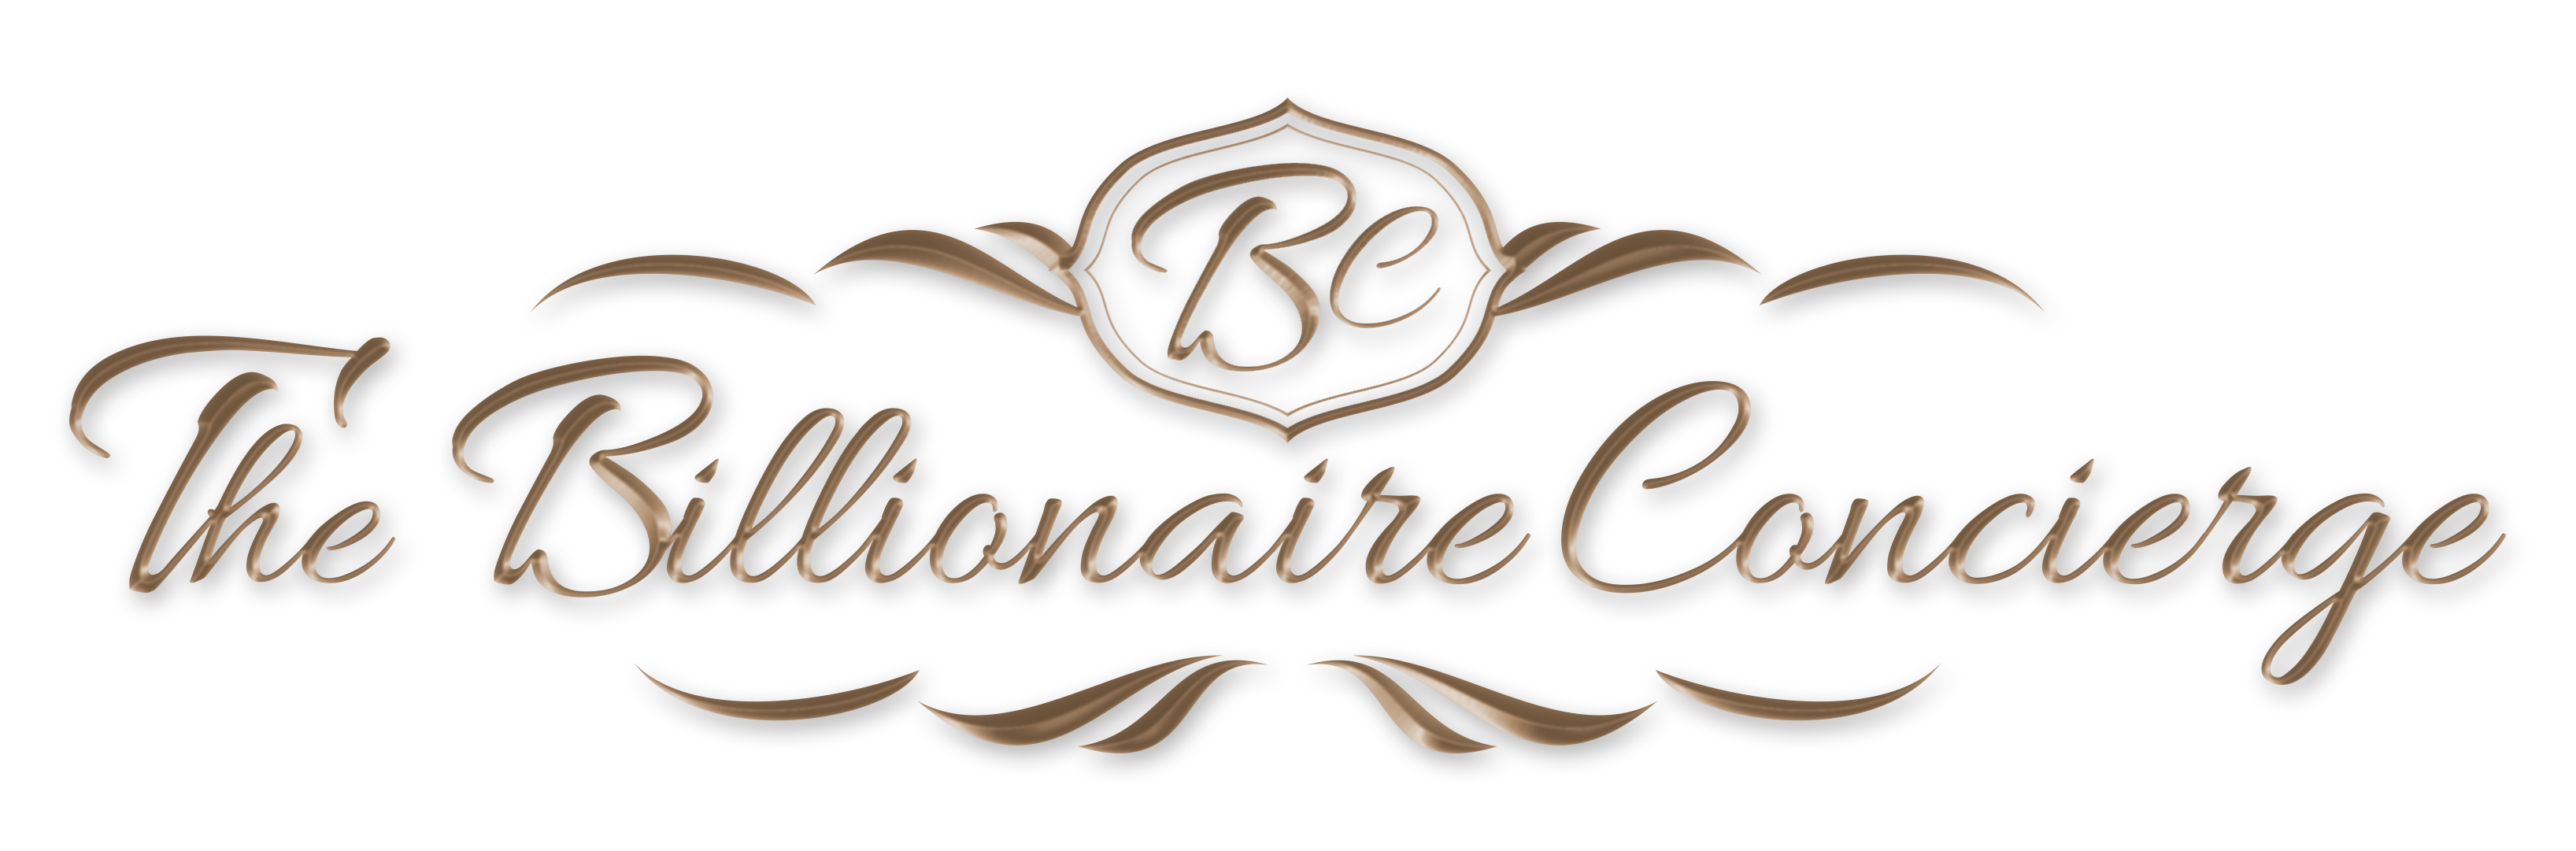 The billionaire concierge is offering luxury concierge and lifestyle management service worldwide